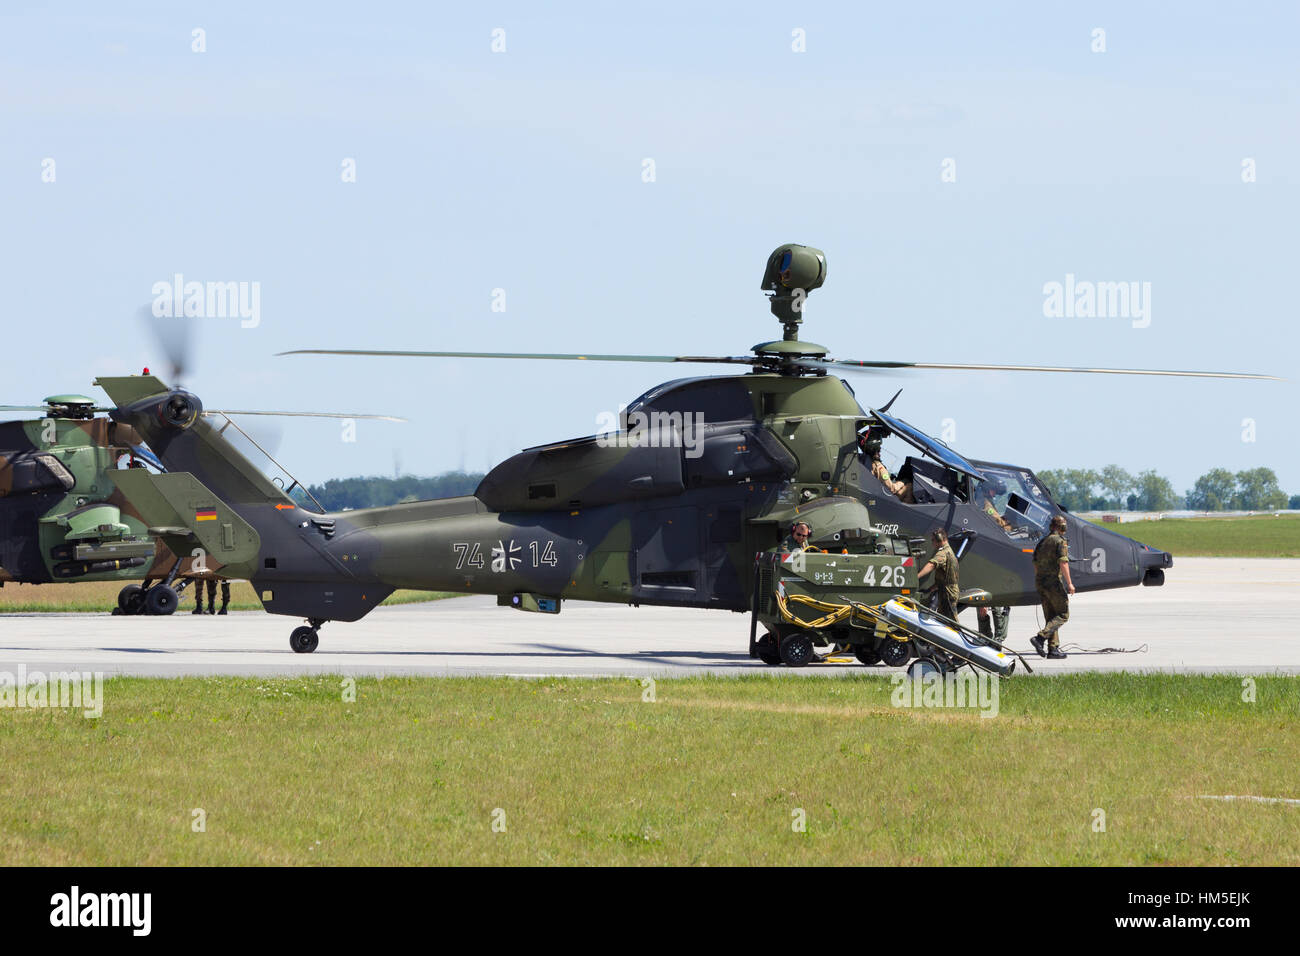 BERLIN, GERMANY - MAY 21: German Army EC665 Tiger attack helicopter flying display at the International Aerospace Exhibition ILA on May 22nd, 2014 in  Stock Photo